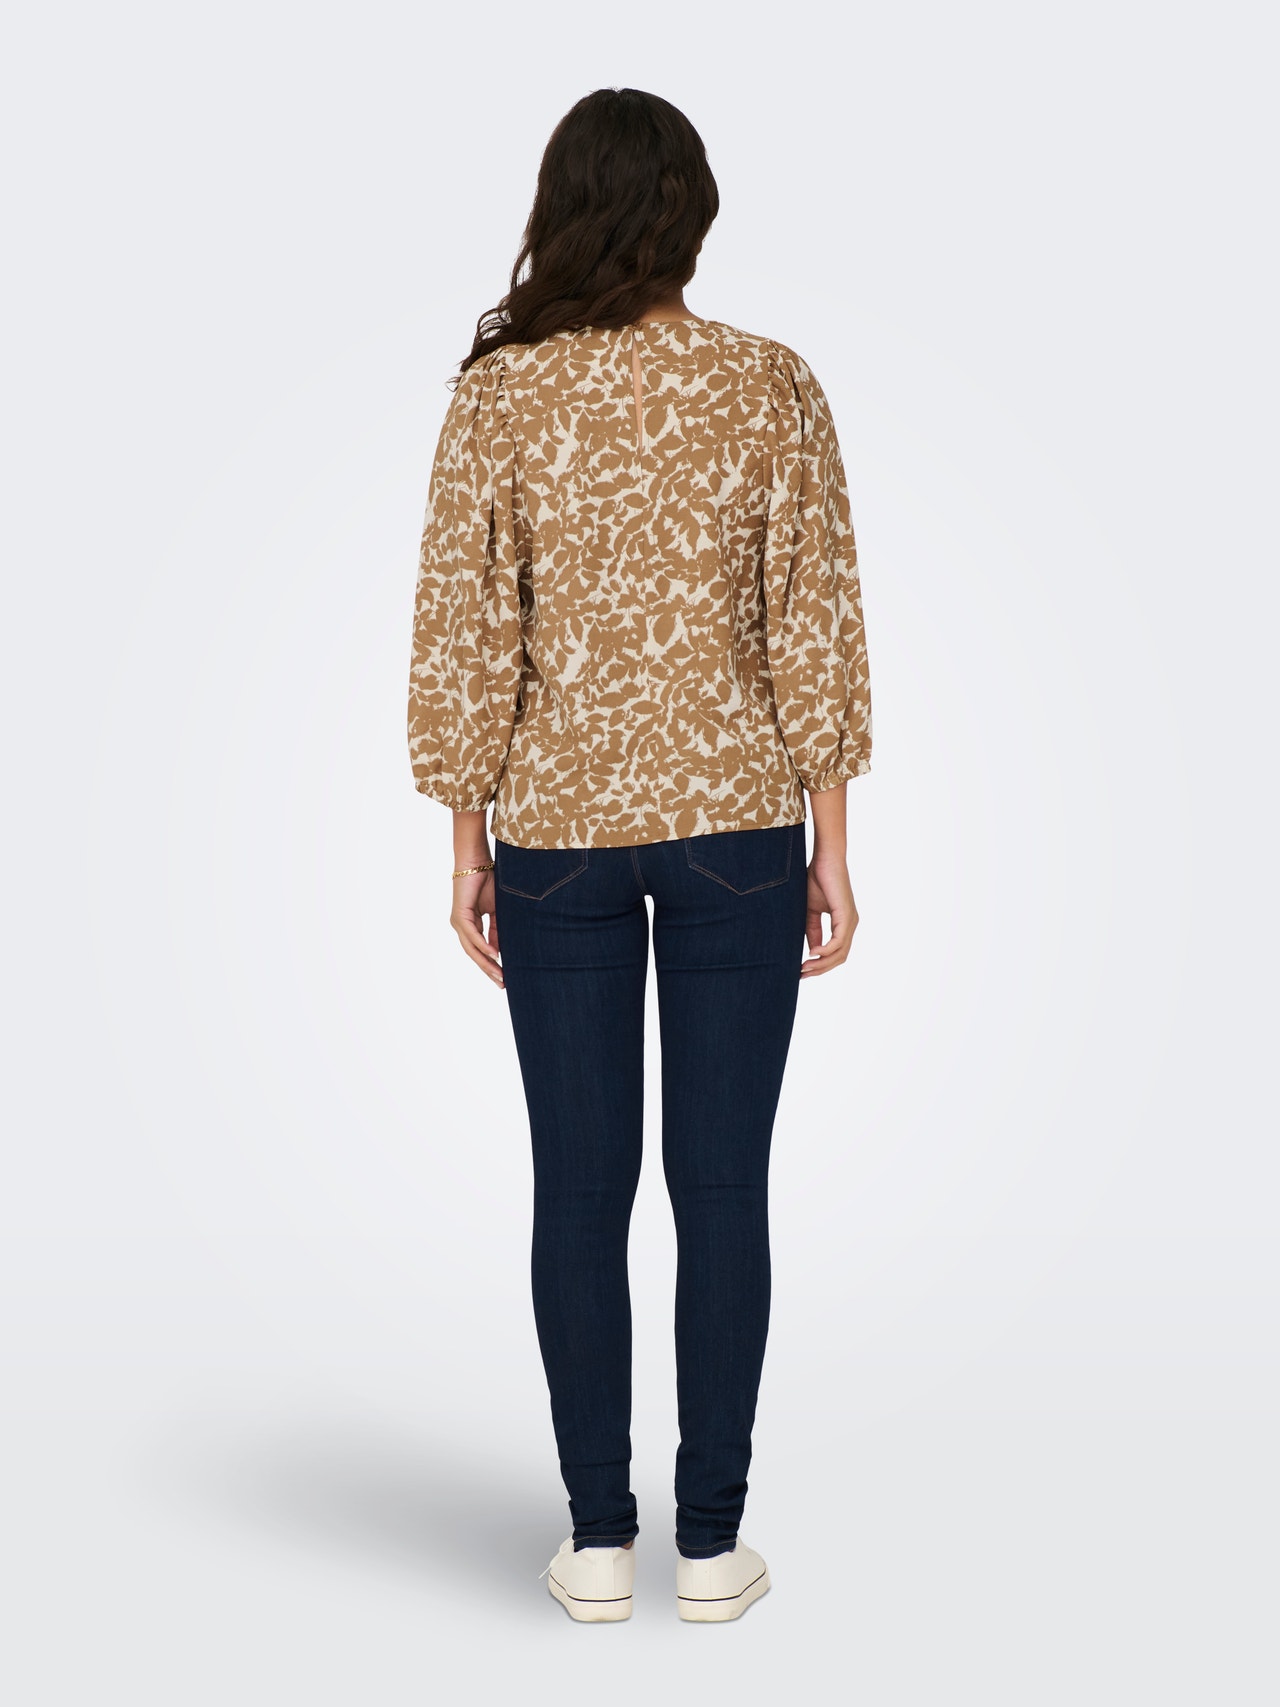 ONLY Loose fit O-hals Gesmokte mouwuiteinden Ballonmouwen Top -Toasted Coconut - 15270946